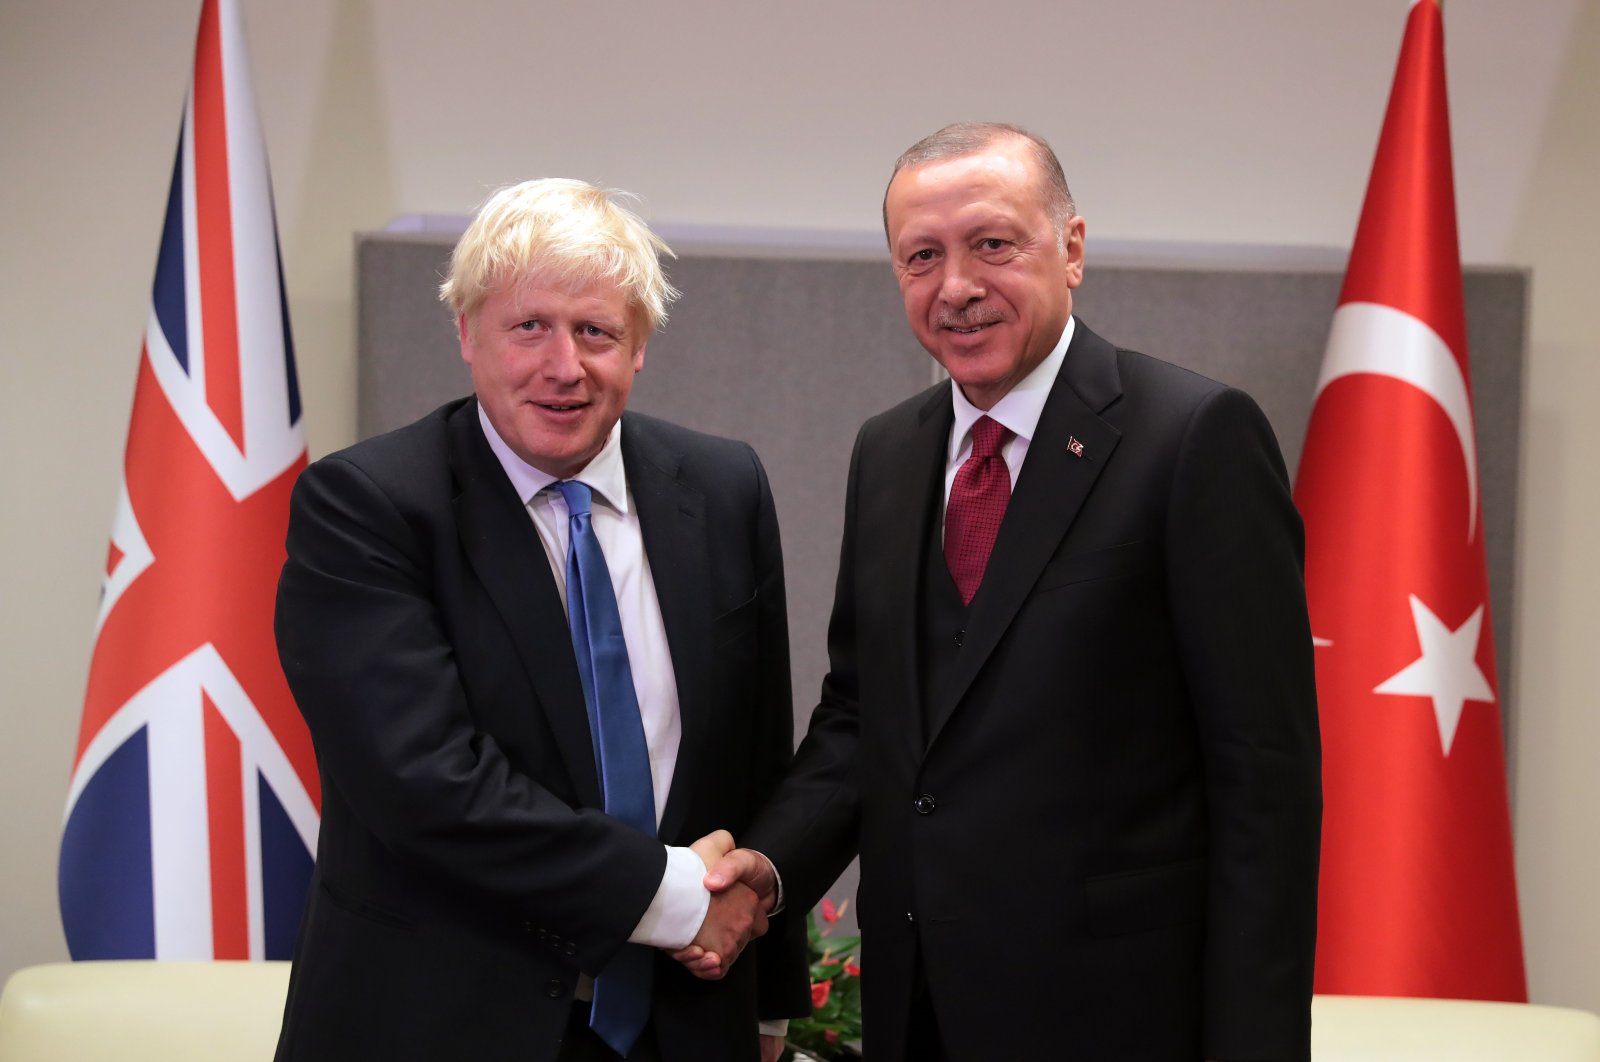 President Recep Tayyip Erdoğan and British Prime Minister Boris Johnson shake hands in a meeting on the sidelines of the 74th General Assembly of the United Nations, New York City, U.S., September 2019. (IHA Photo)